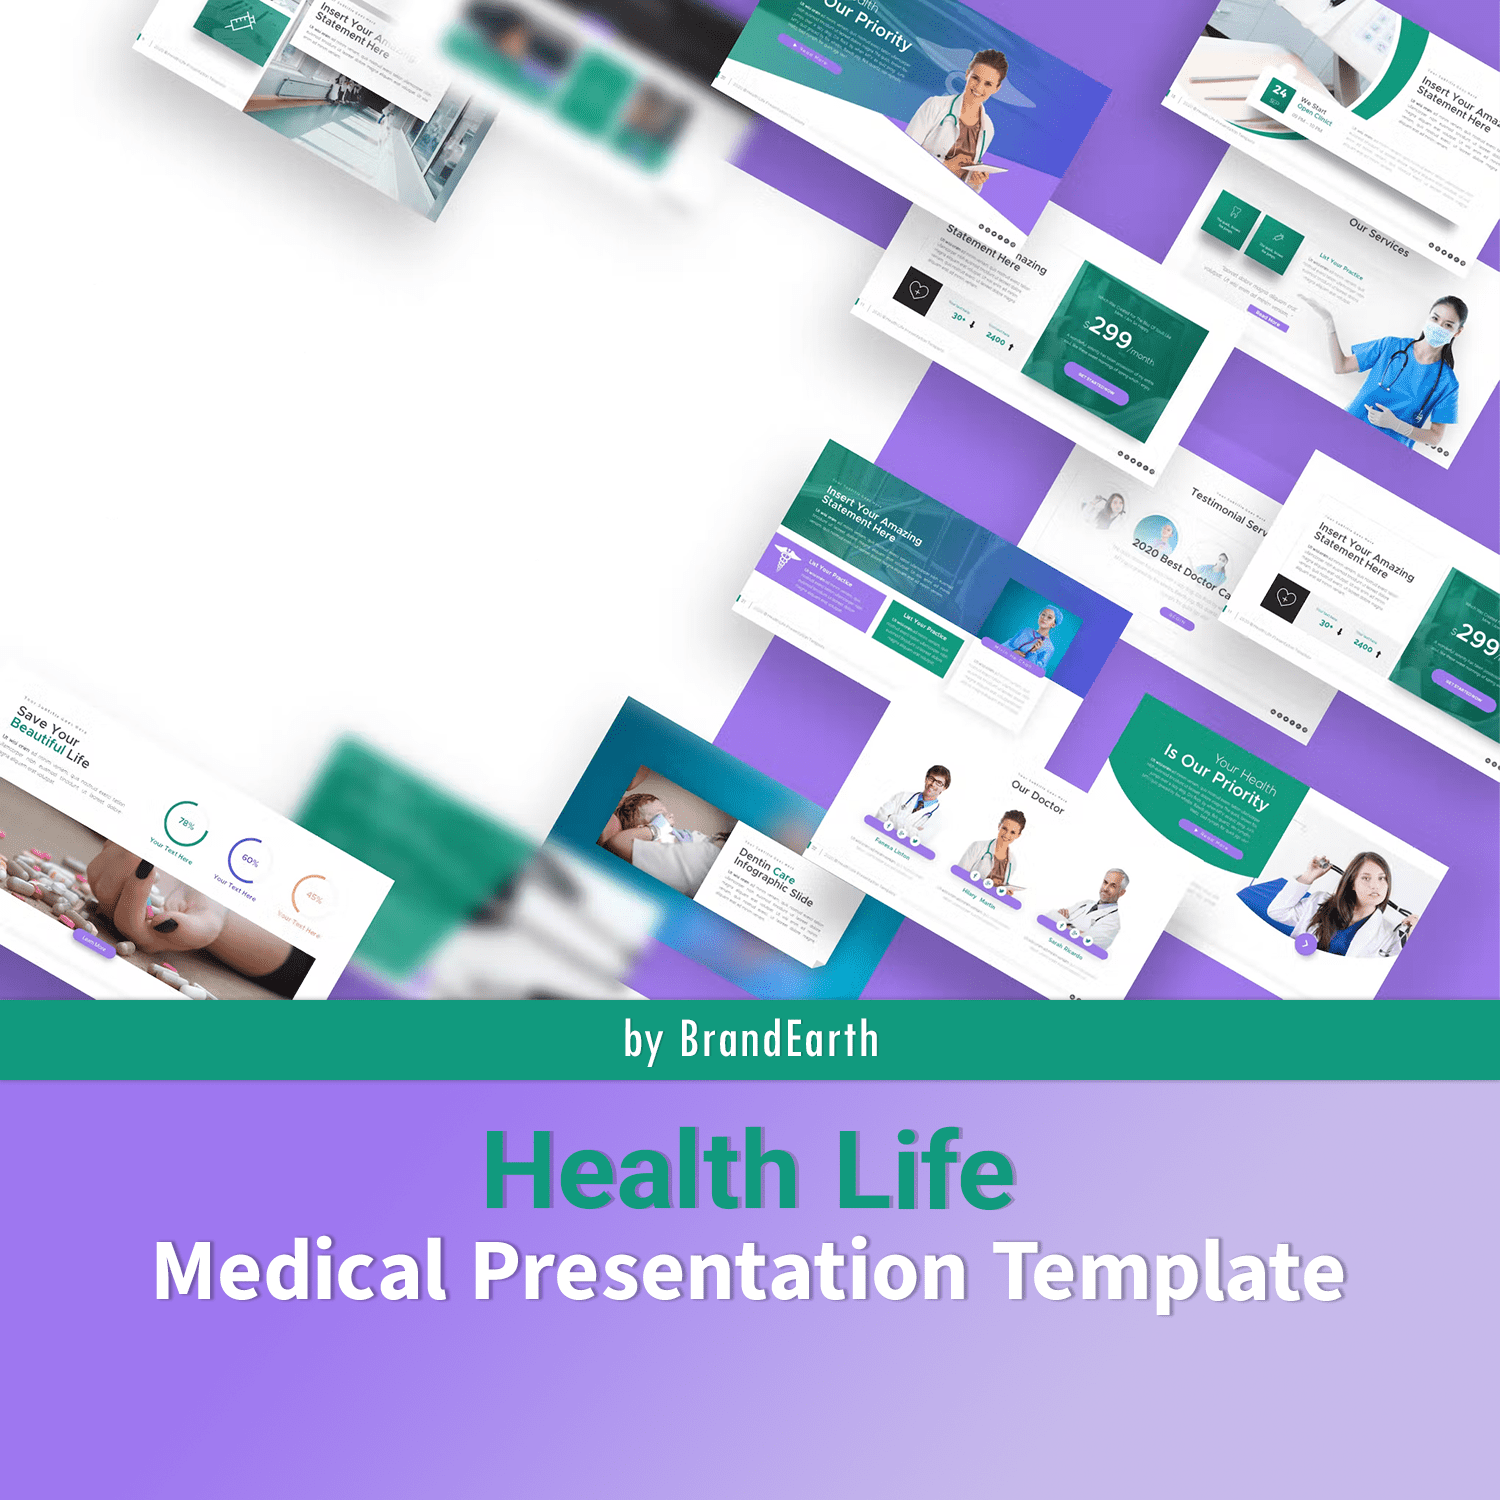 Health Life Medical Presentation Template Cover.